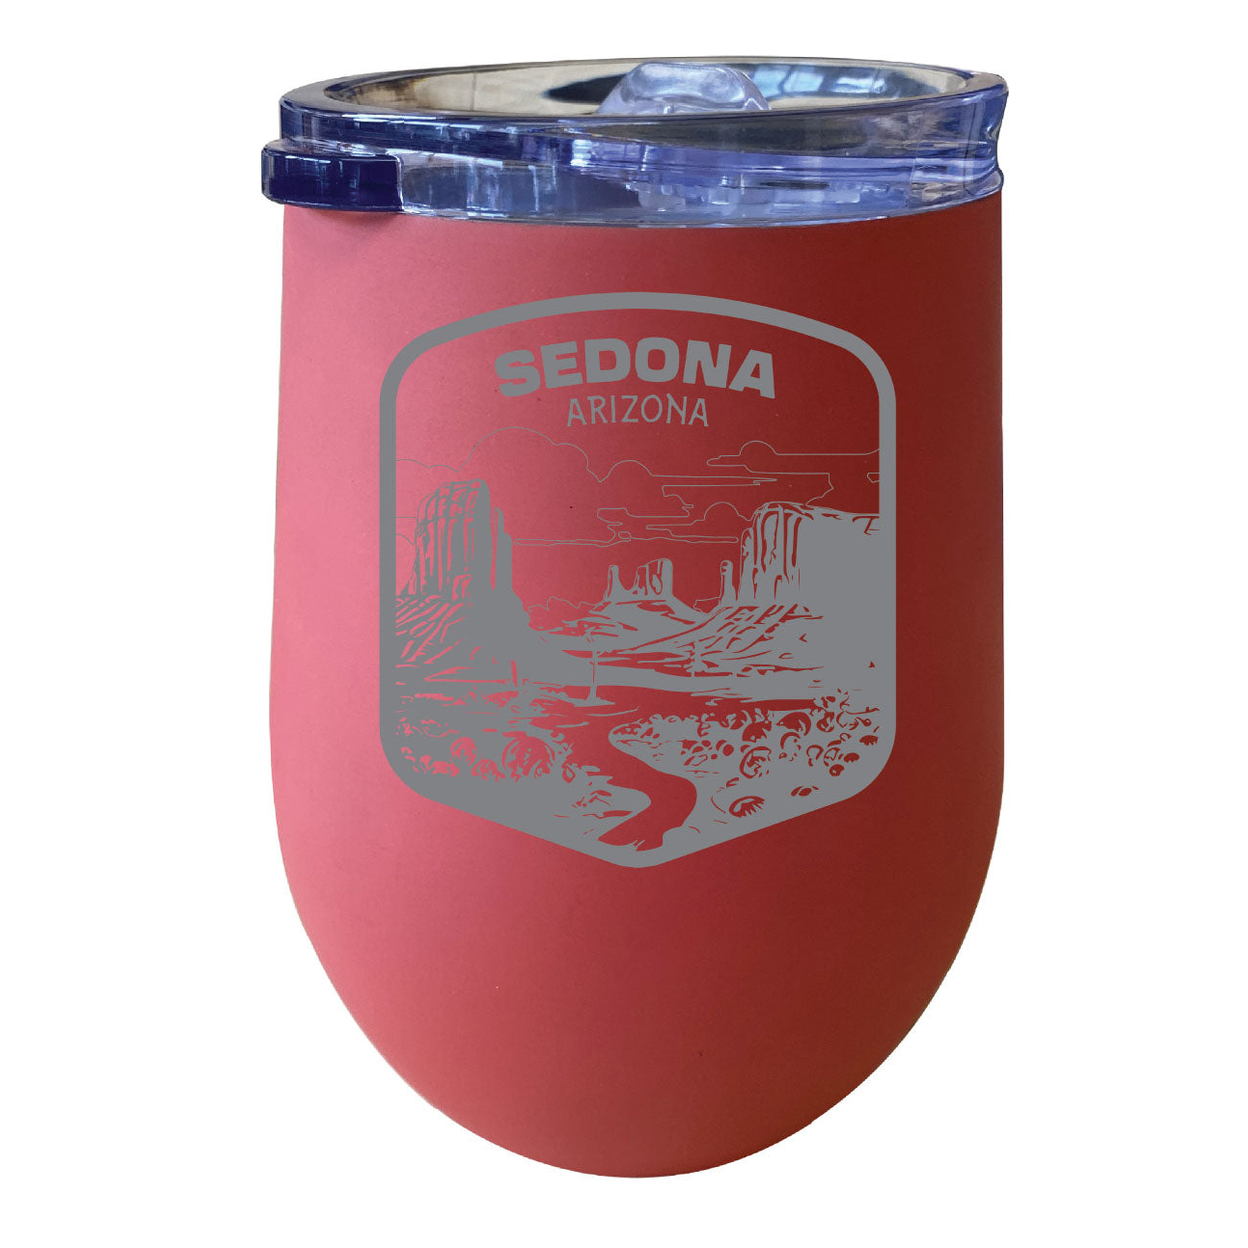 Sedona Arizona Souvenir 12 Oz Engraved Insulated Wine Stainless Steel Tumbler - Coral,,4-Pack